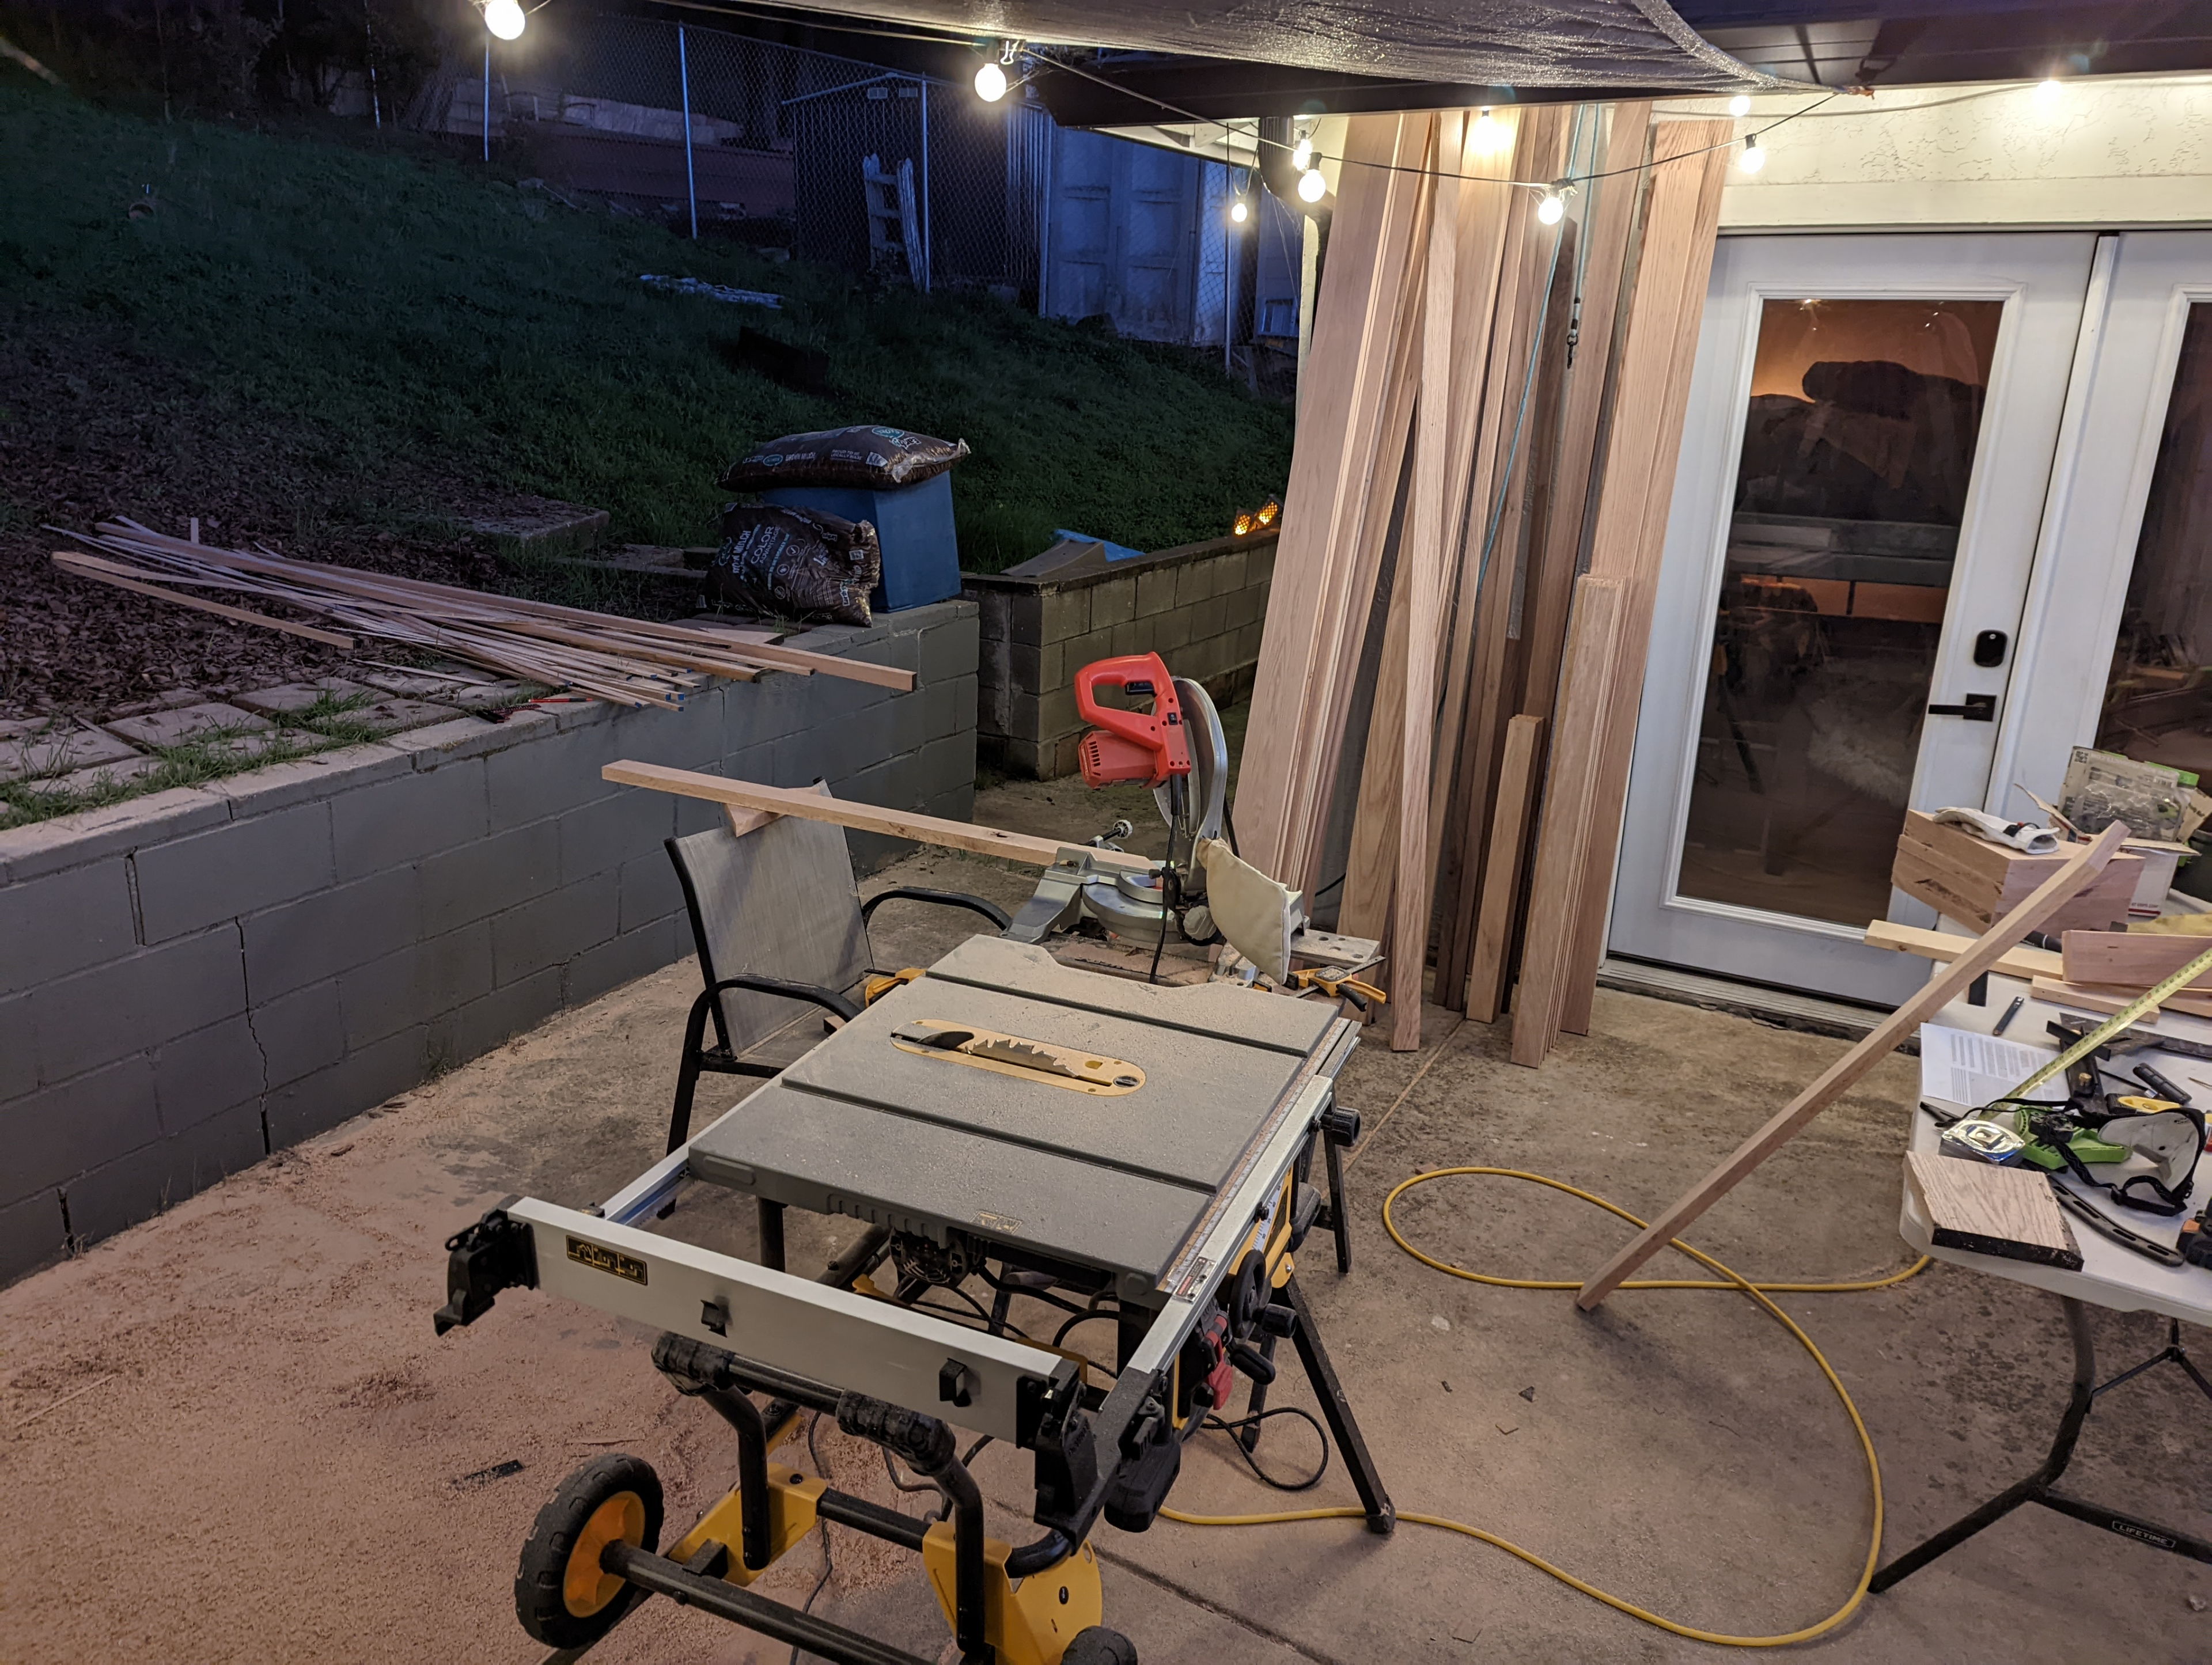 A few days later I began processing the lumber by ripping the pieces to width and length according to my plans. I hadnt't used a table saw in probably two decades, and it was also my first time using featherboards. I had a lot to figure out.